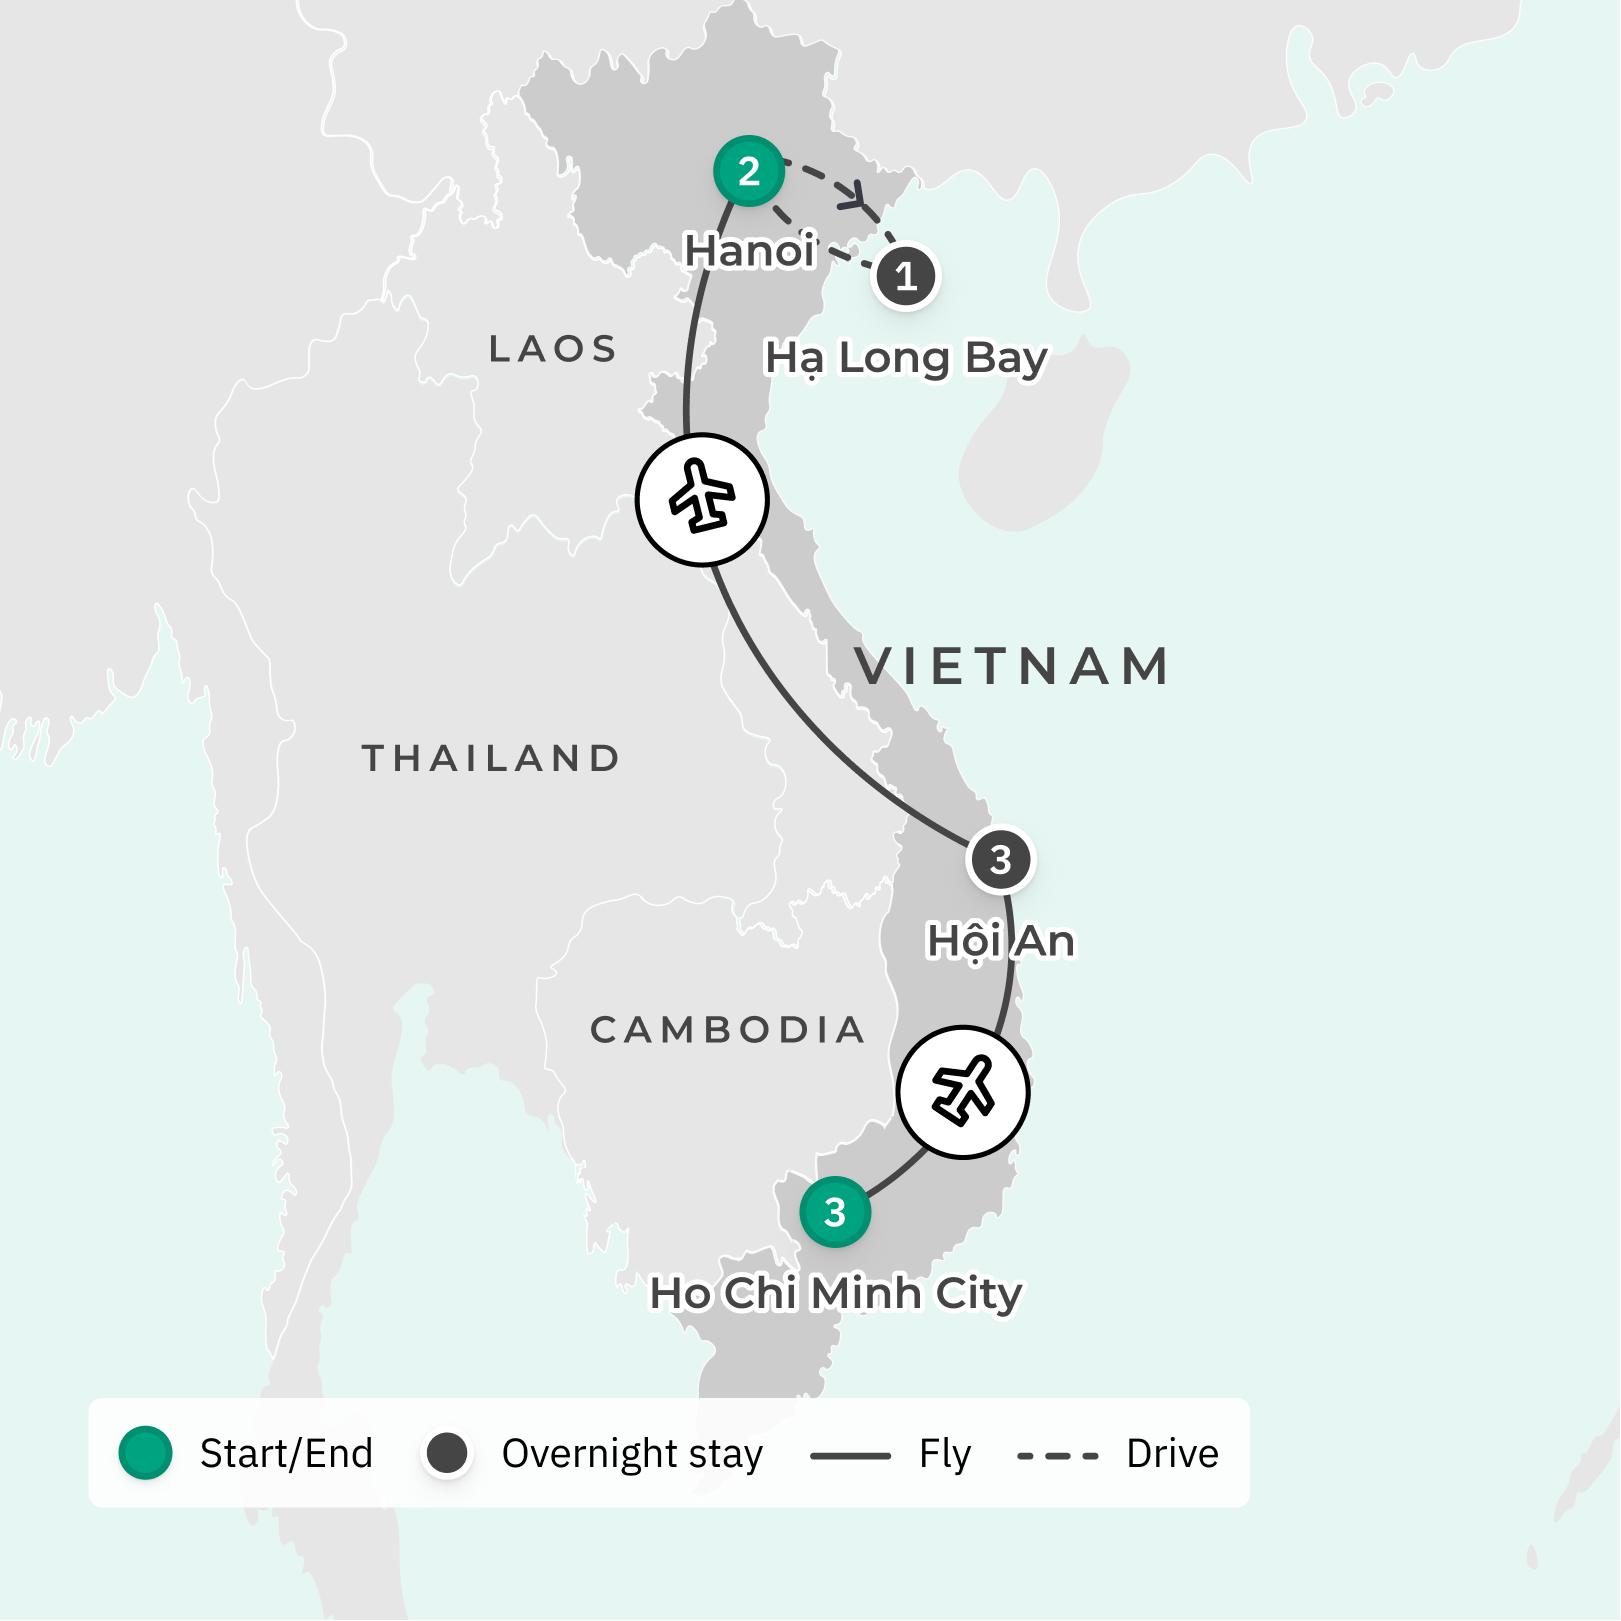 Vietnam Highlights Tour with Four-Star Stays, Ha Long Bay Cruise, Hoi An Old Town Visit & Mekong Delta Sampan Tour route map